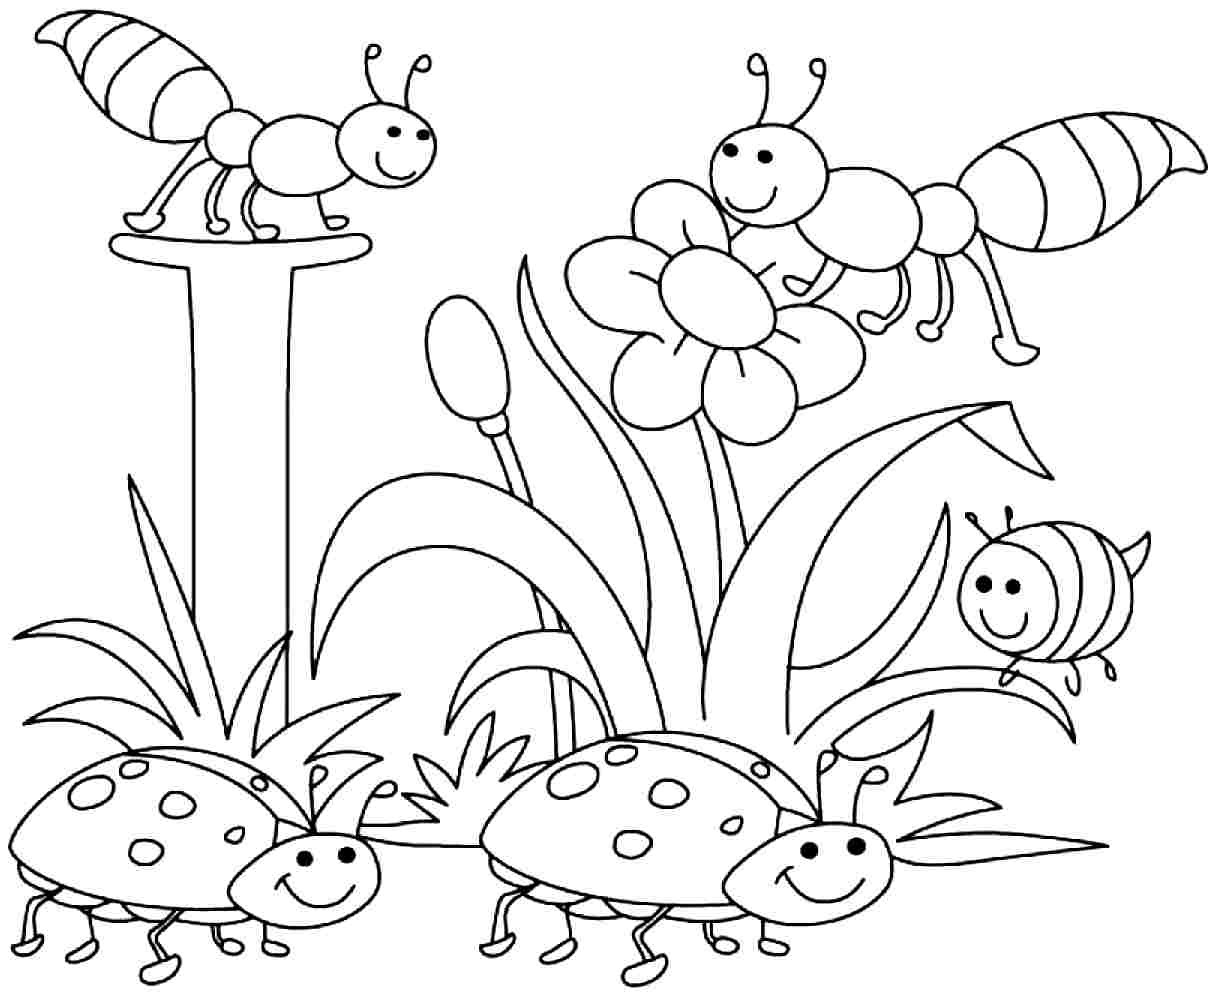 Spring Coloring Pages For Toddlers
 5 Best of Spring Season Coloring Pages Printable